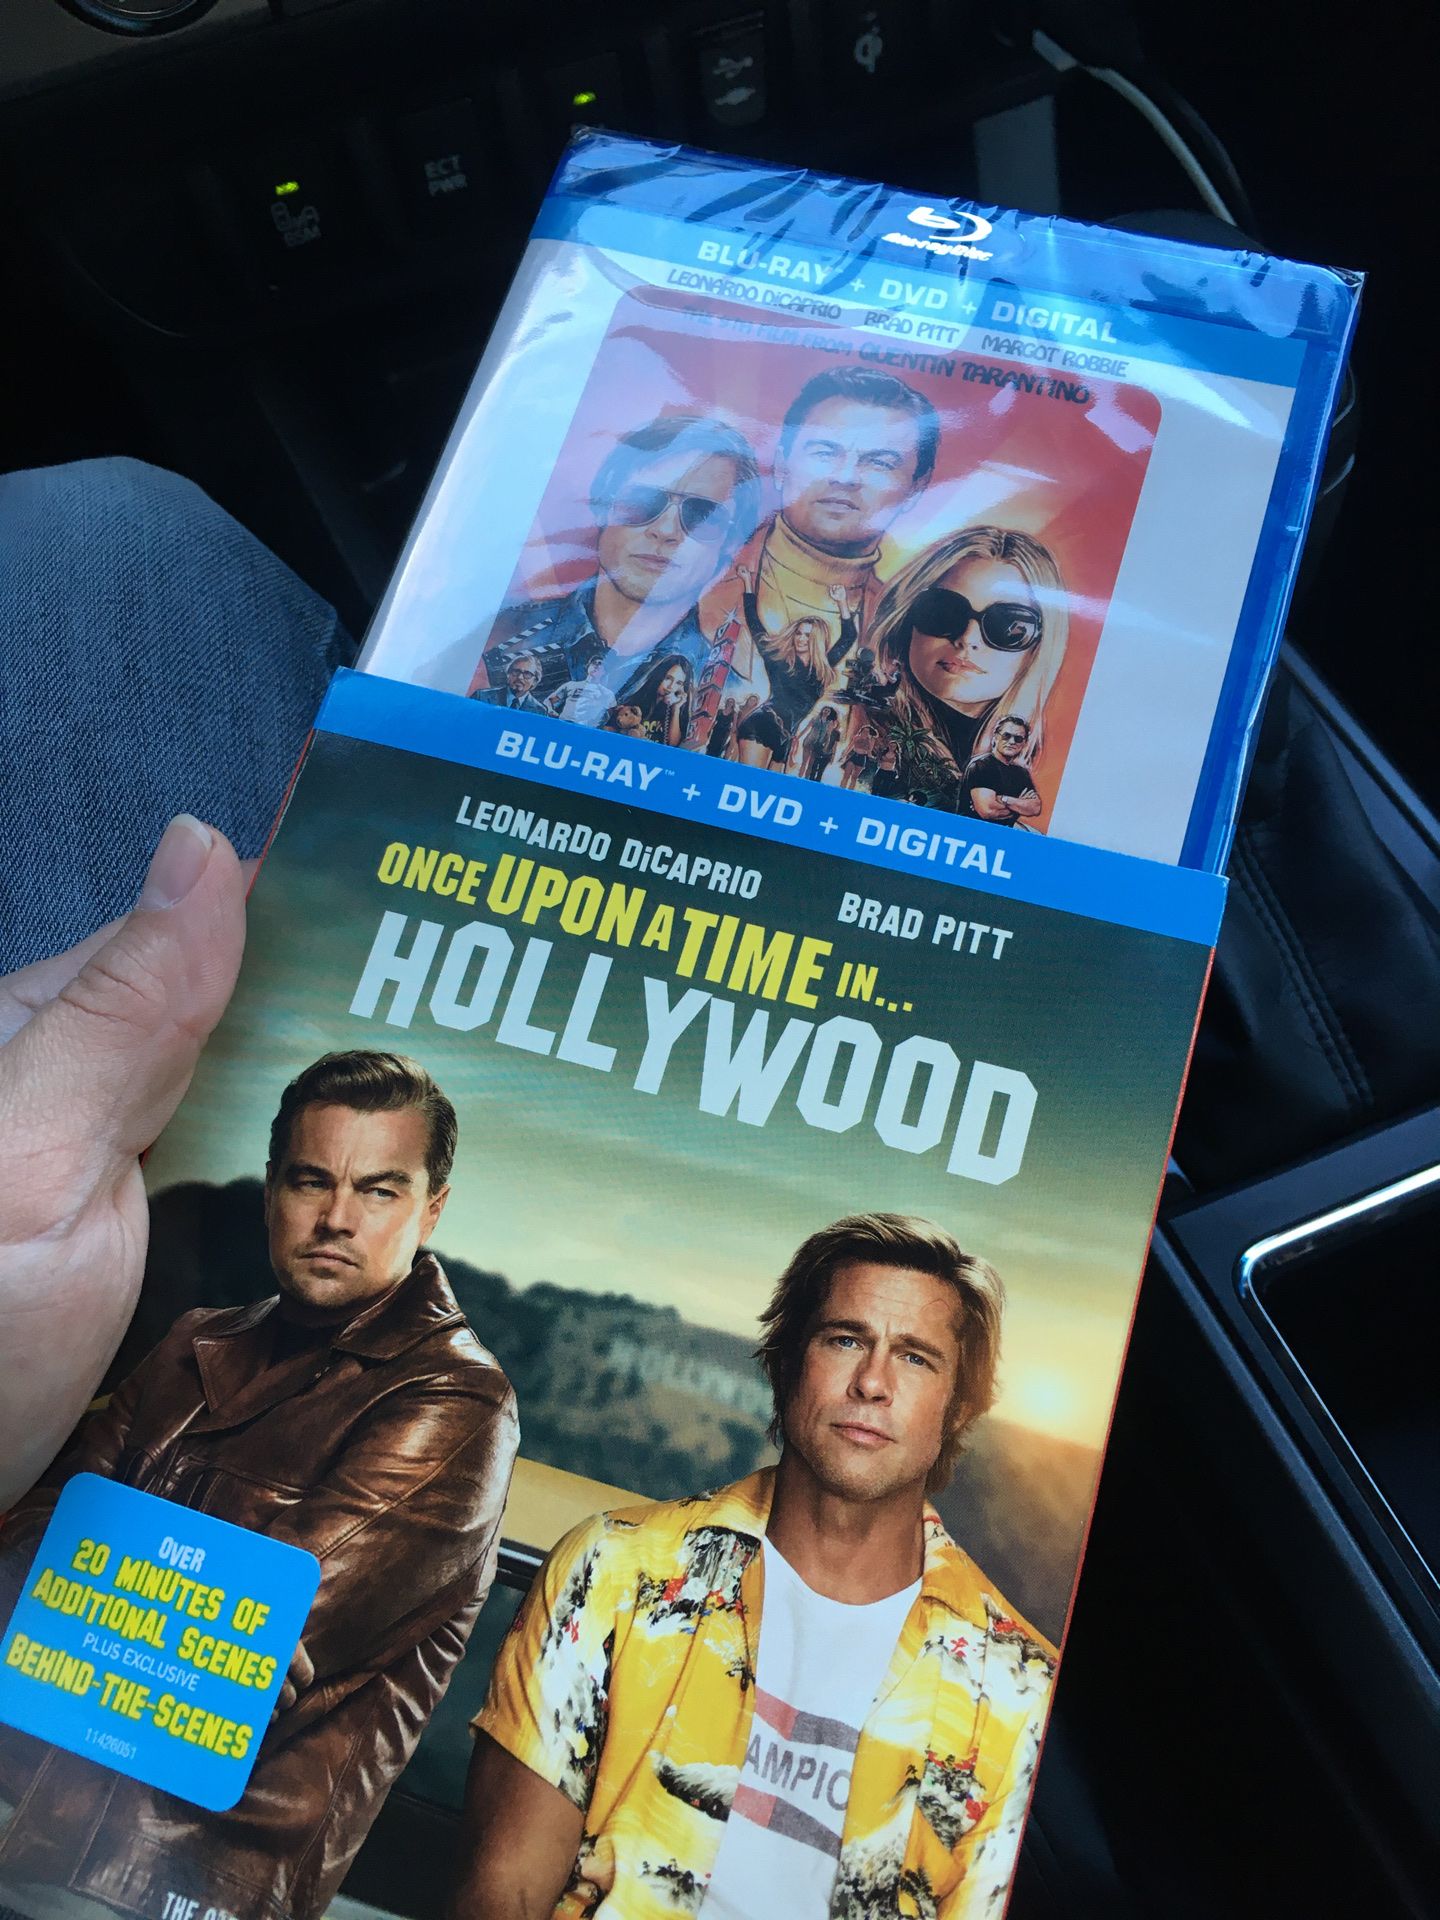 Once upon a time in Hollywood dvd blue ray